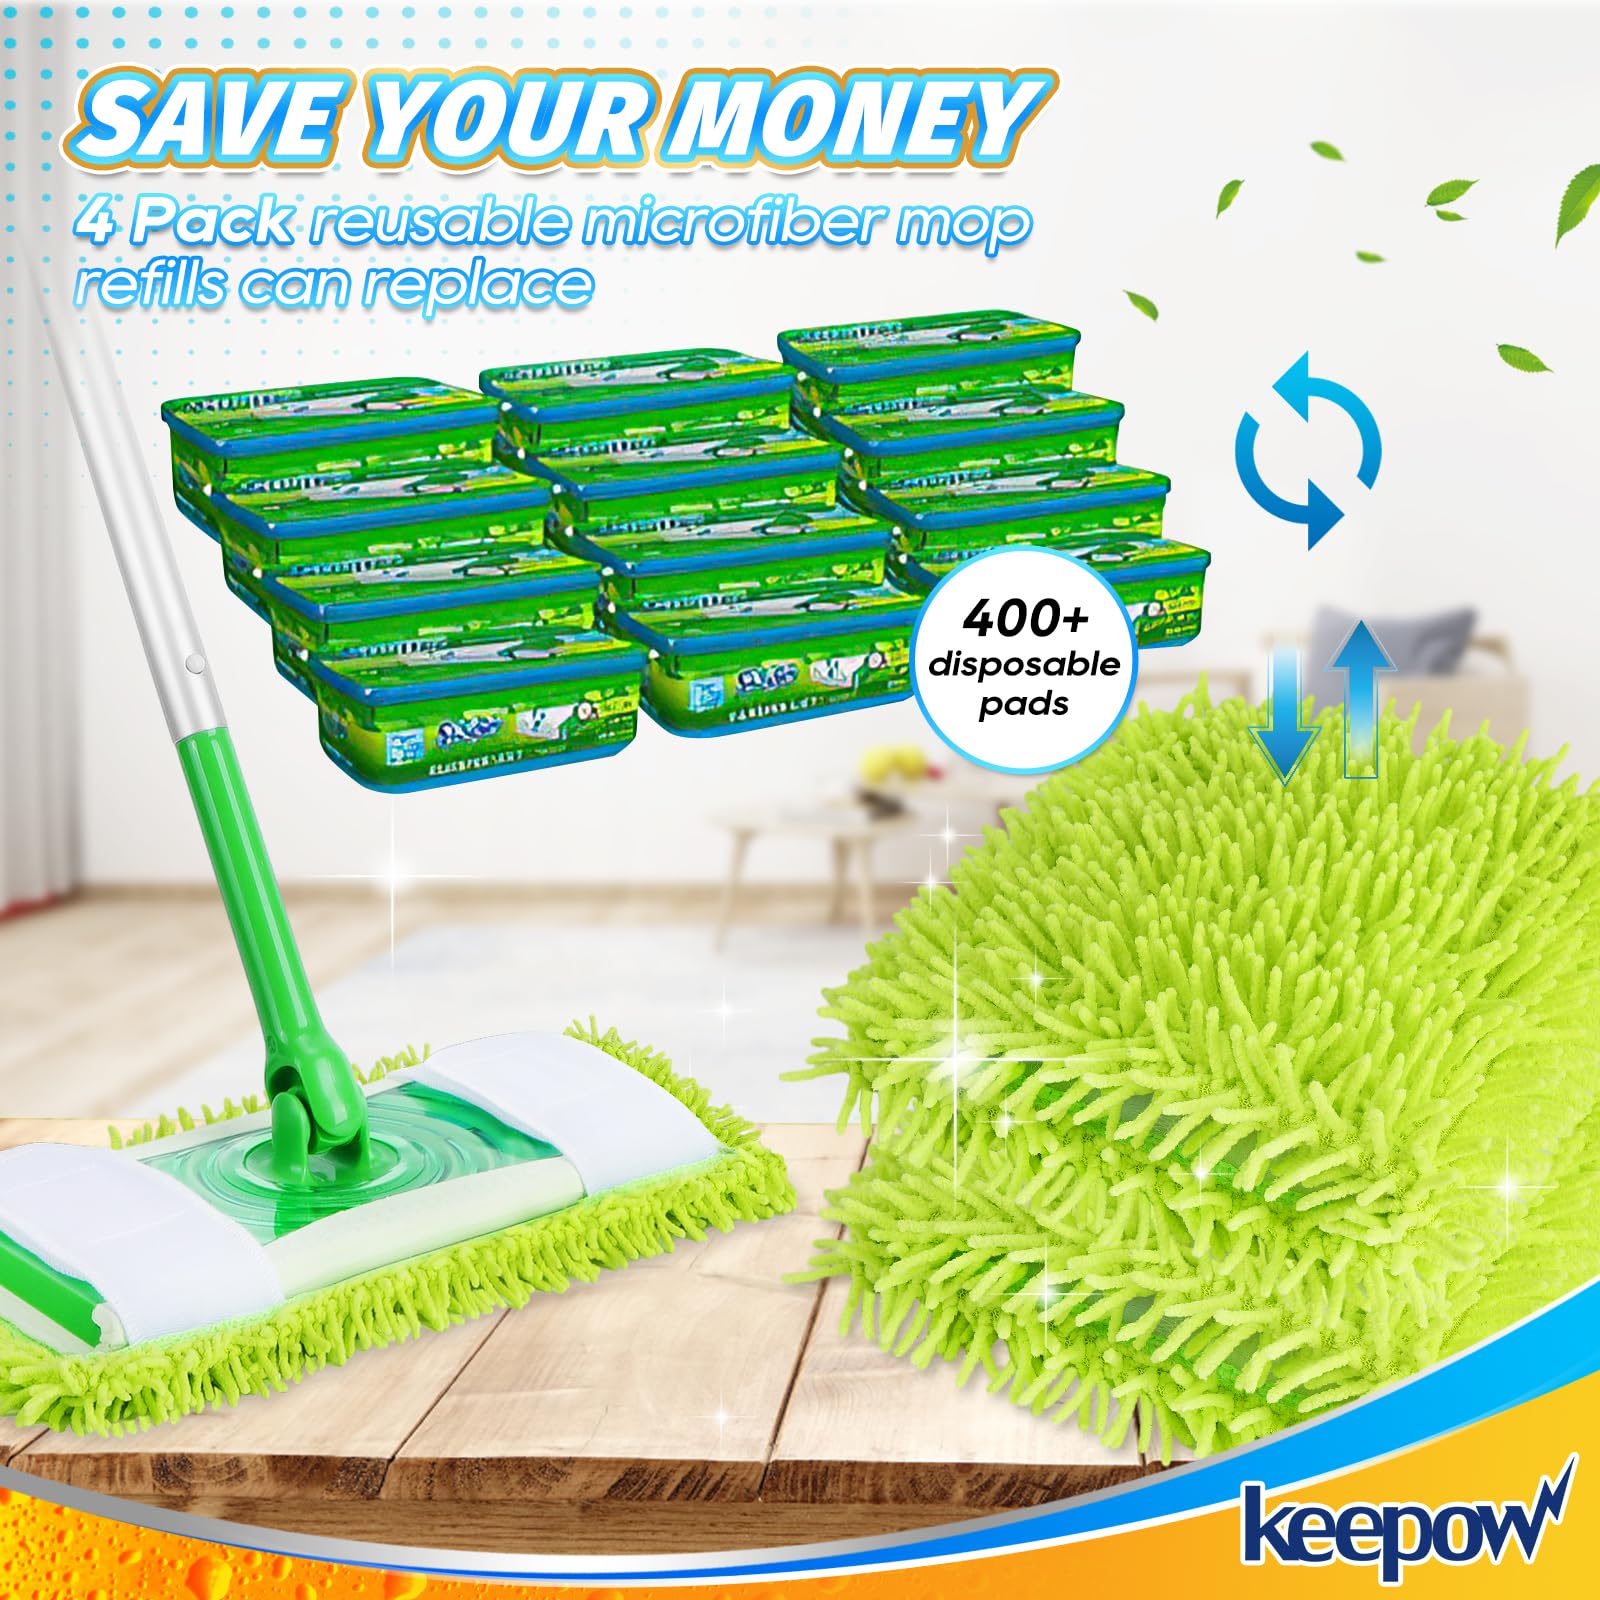 KEEPOW Reusable Microfiber Mop Pads Compatible with Swiffer Sweeper Mop, Washable Wet Mop Refills for Hardwood Floor Cleaning, 4 Pack (Mop is Not Included)